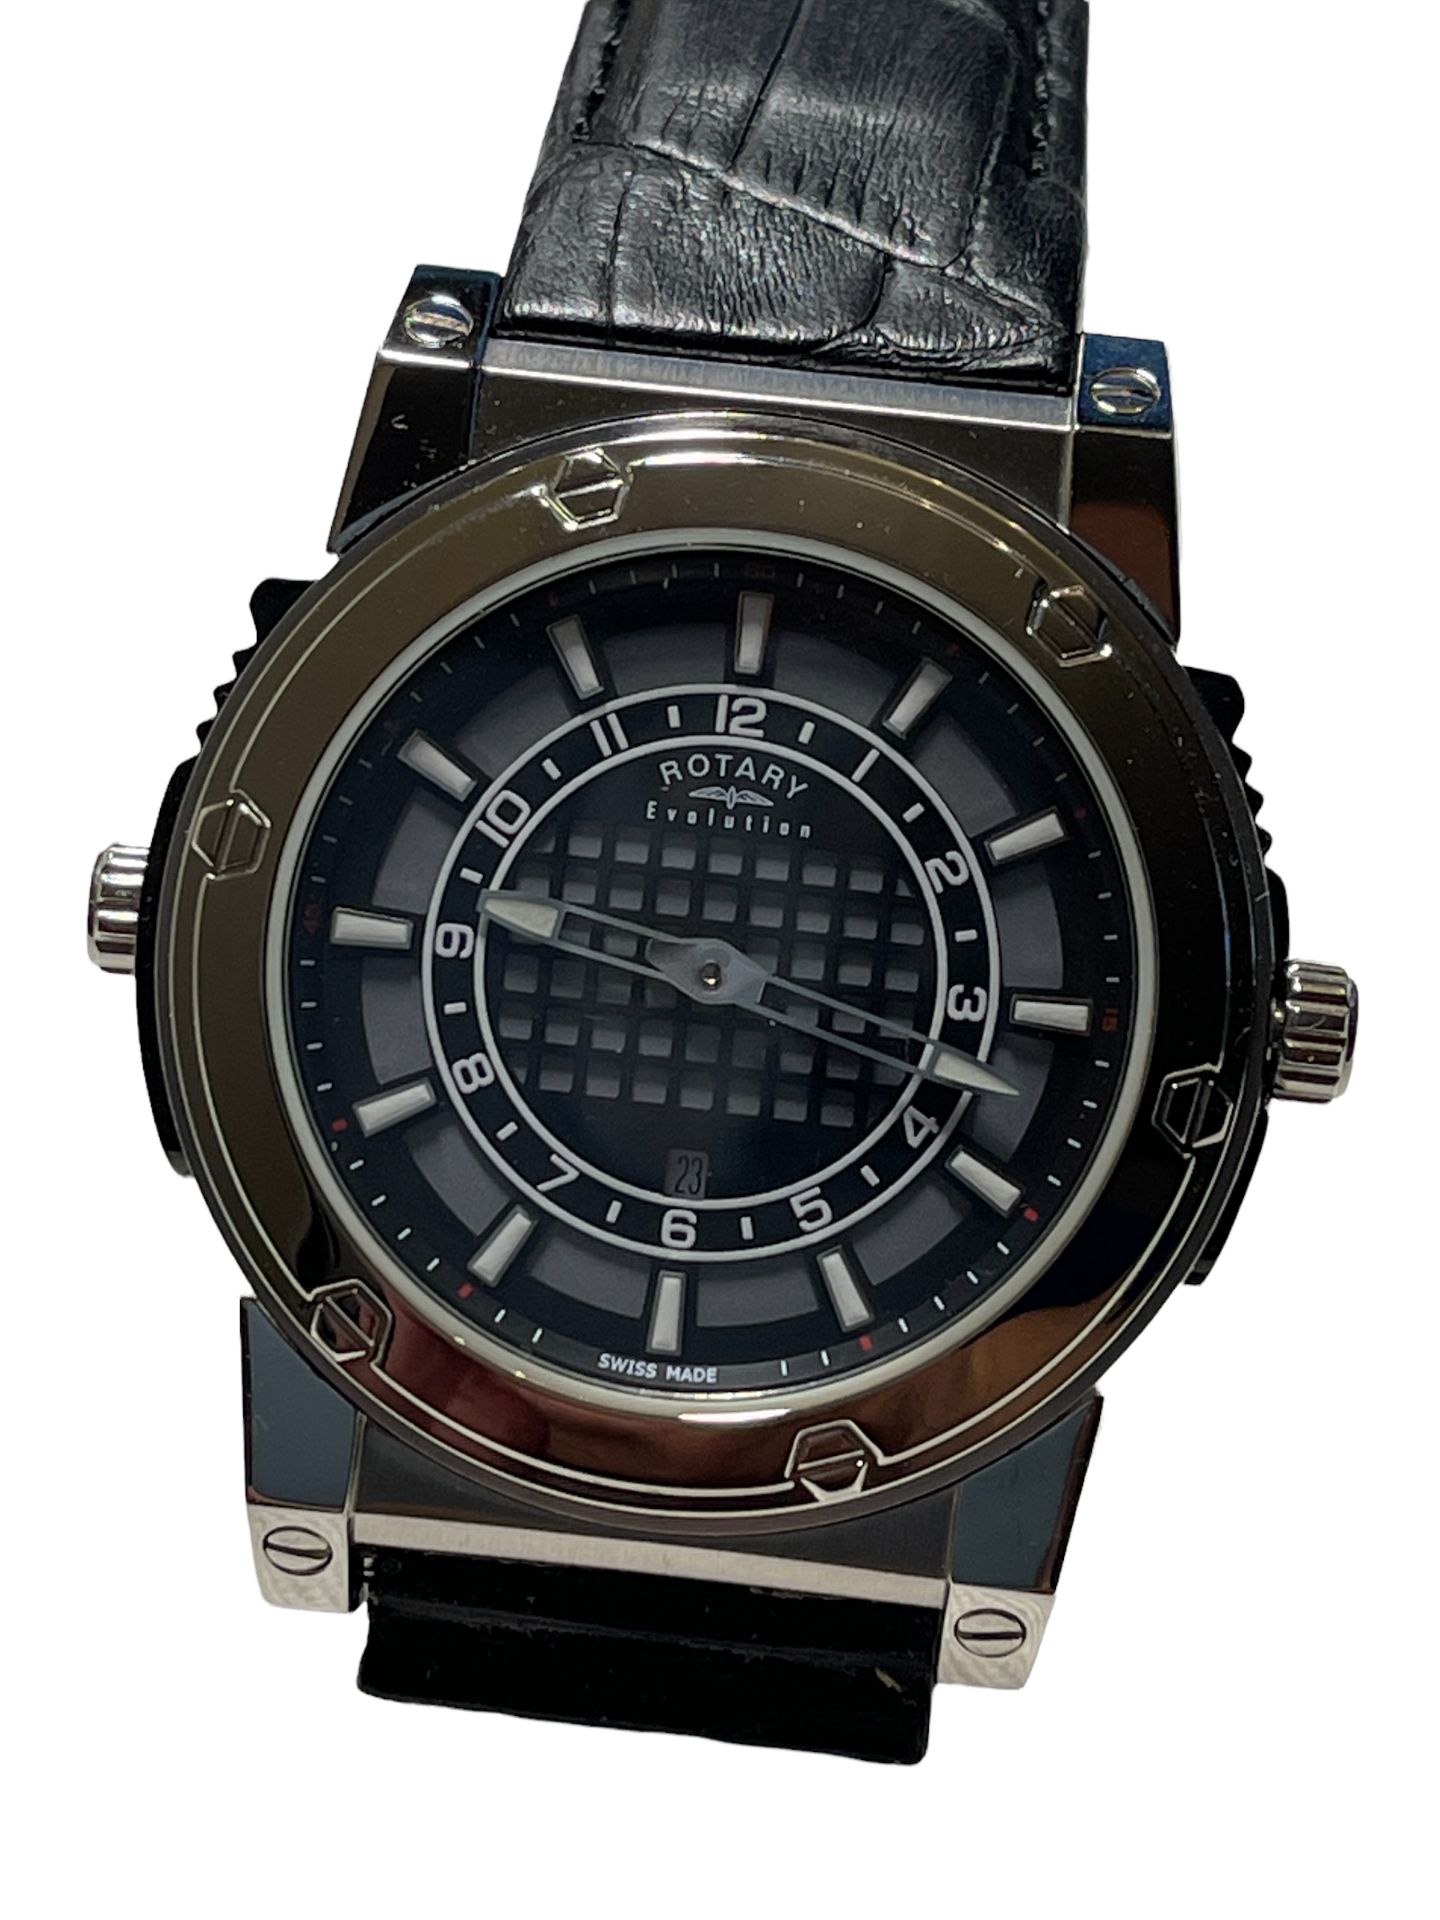 Swiss Made Rotary Evolution Dual Face Unisex Watch - Surplus Stock from Private Jet Charter RRP £750 - Image 2 of 14